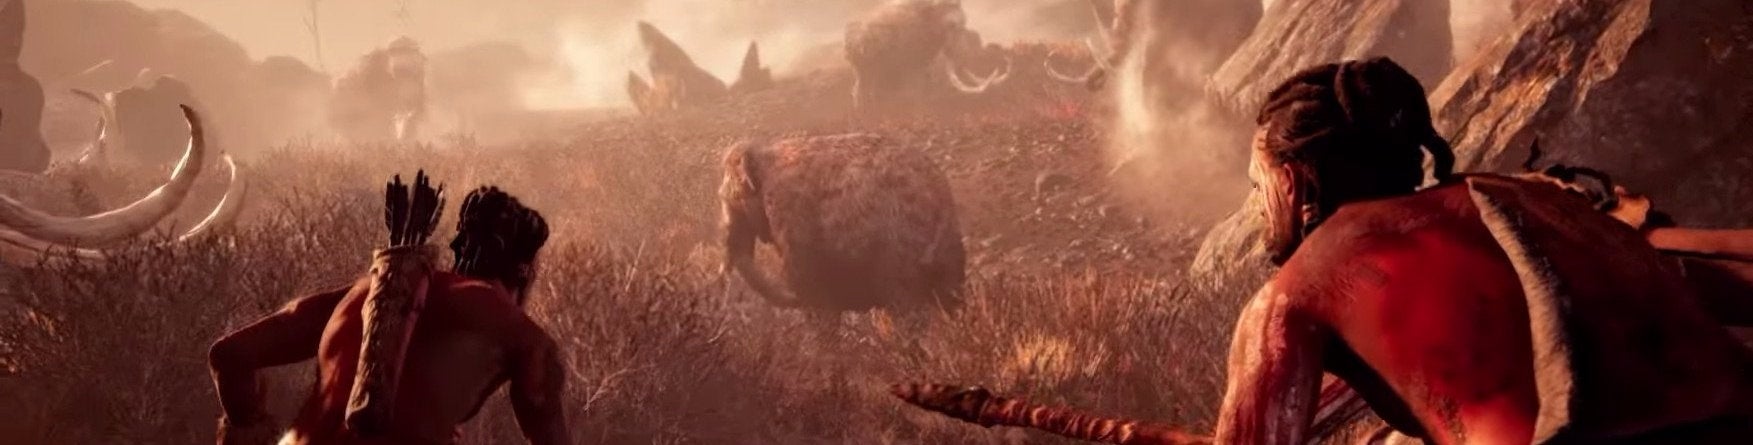 Image for Digital Foundry: Hands-on with Far Cry Primal